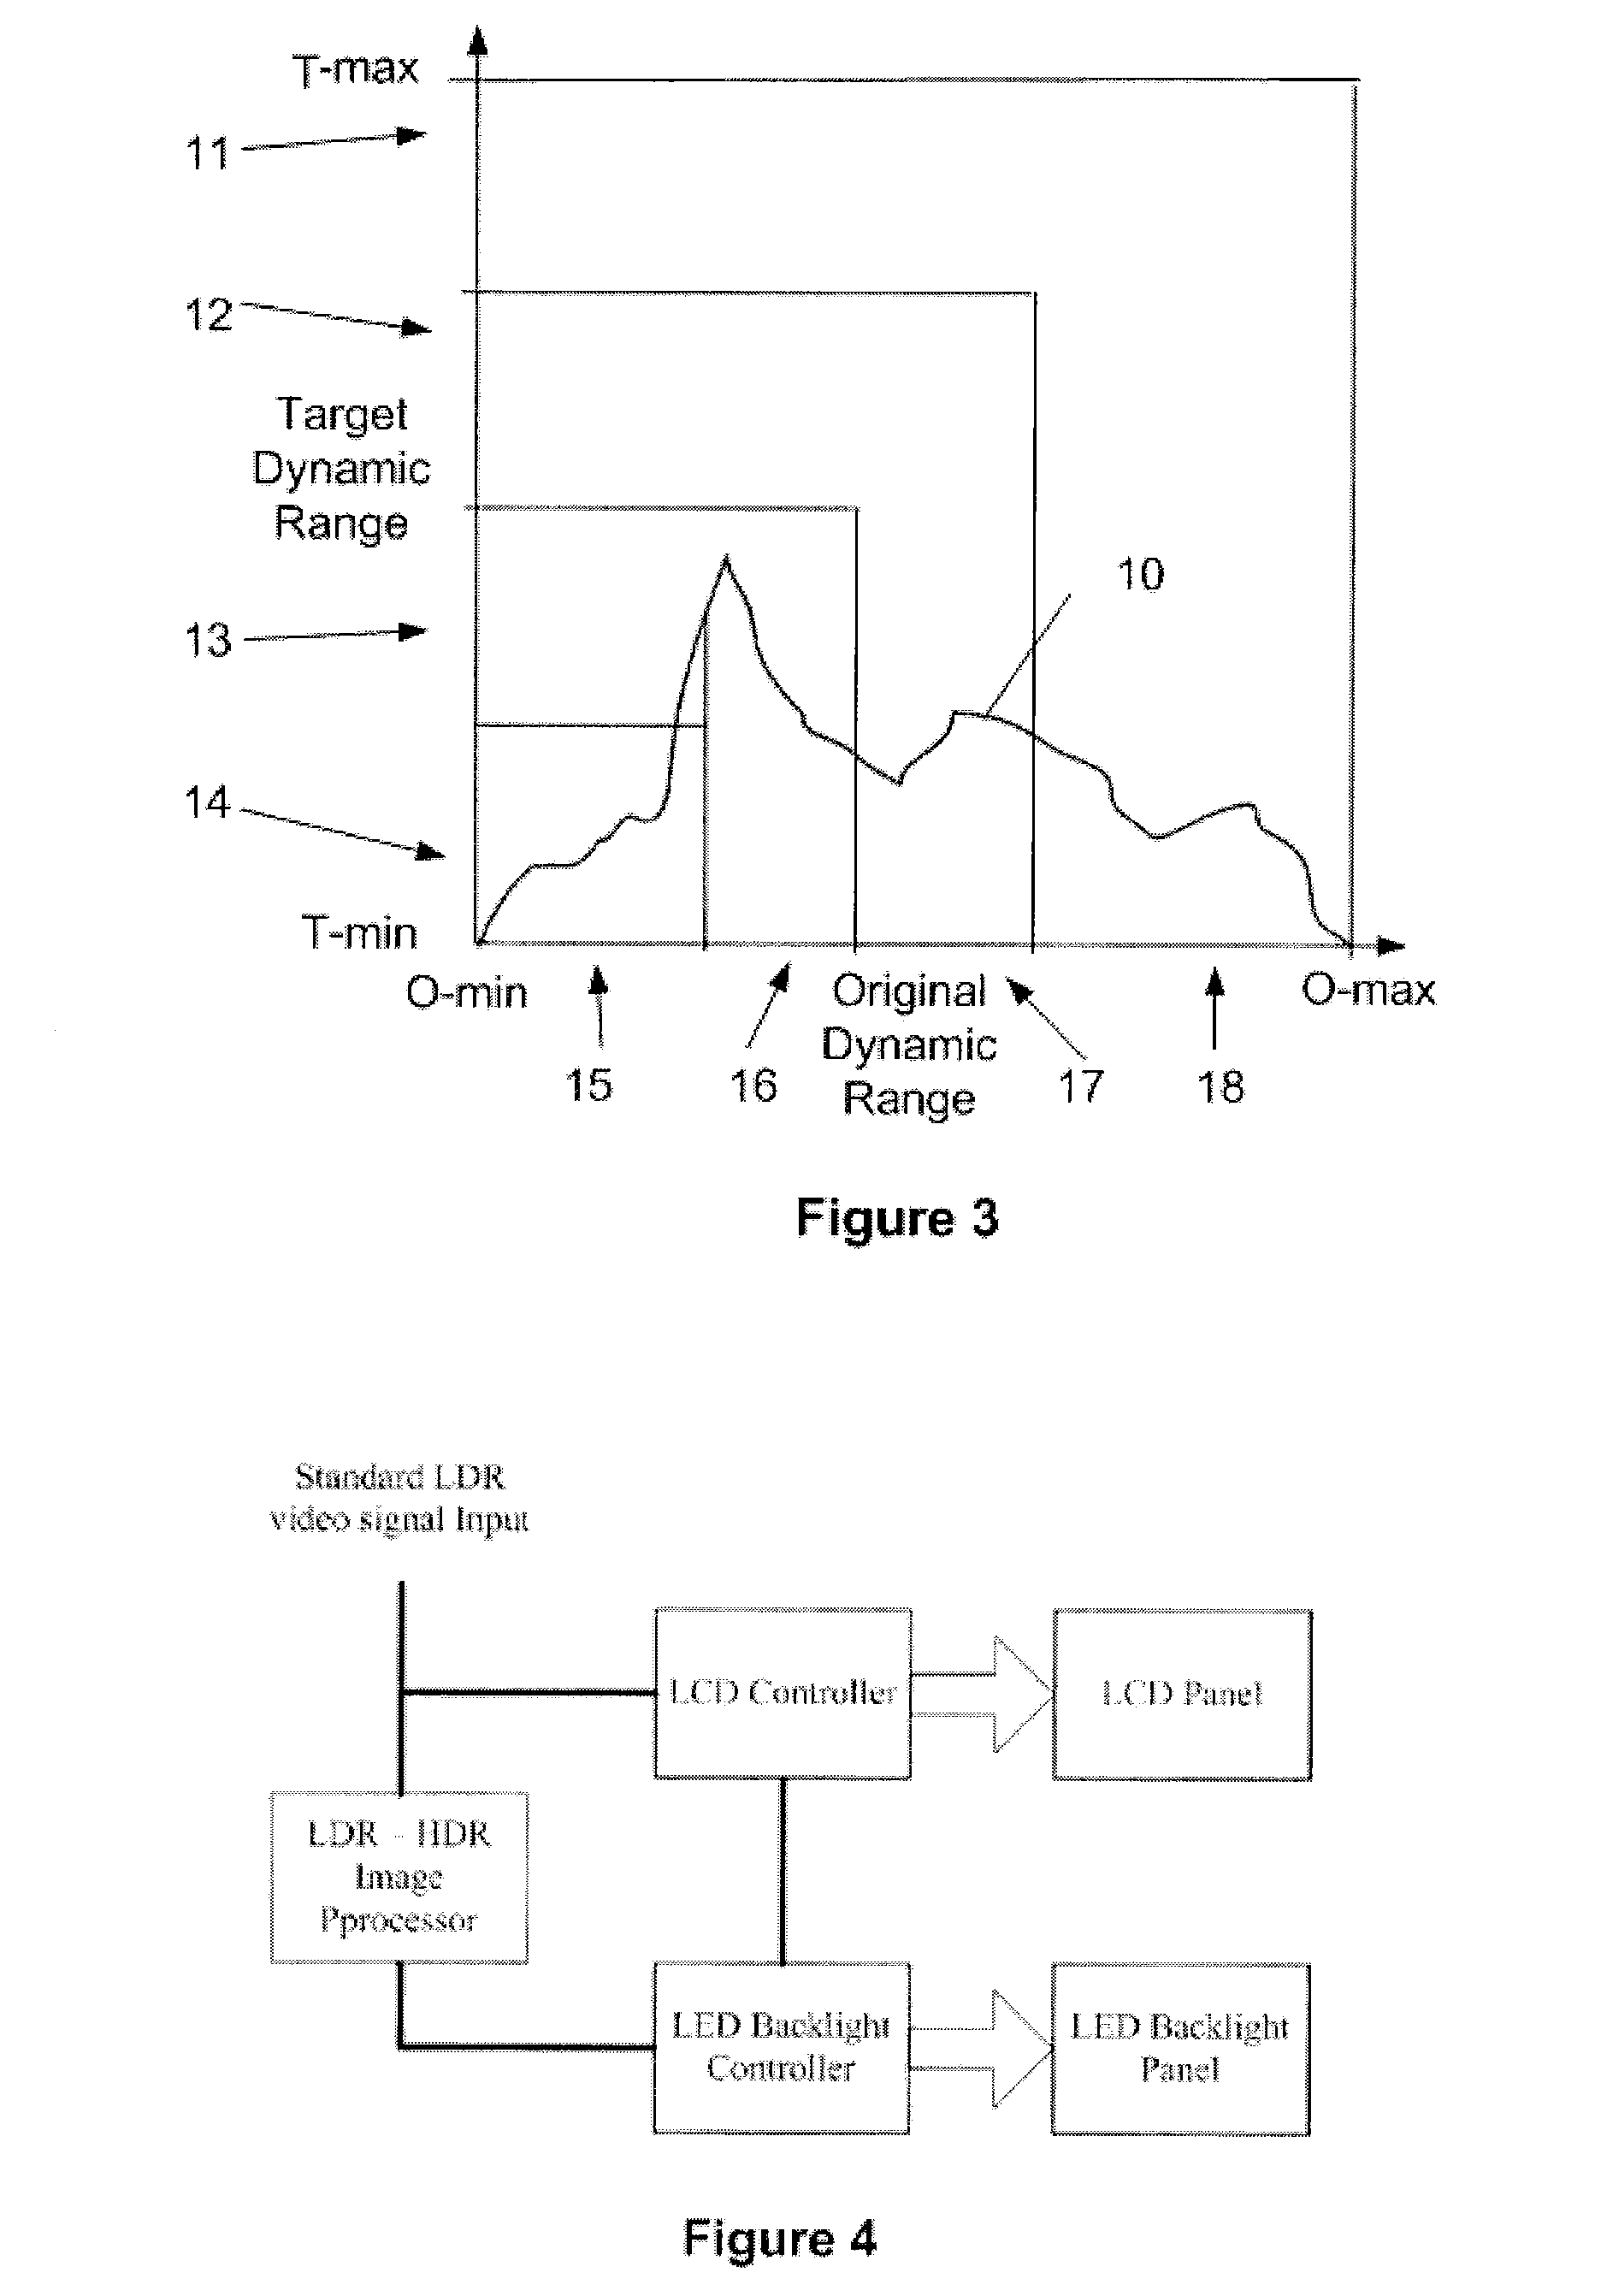 Method and Apparatus for Enhancing the Dynamic Range of an Image